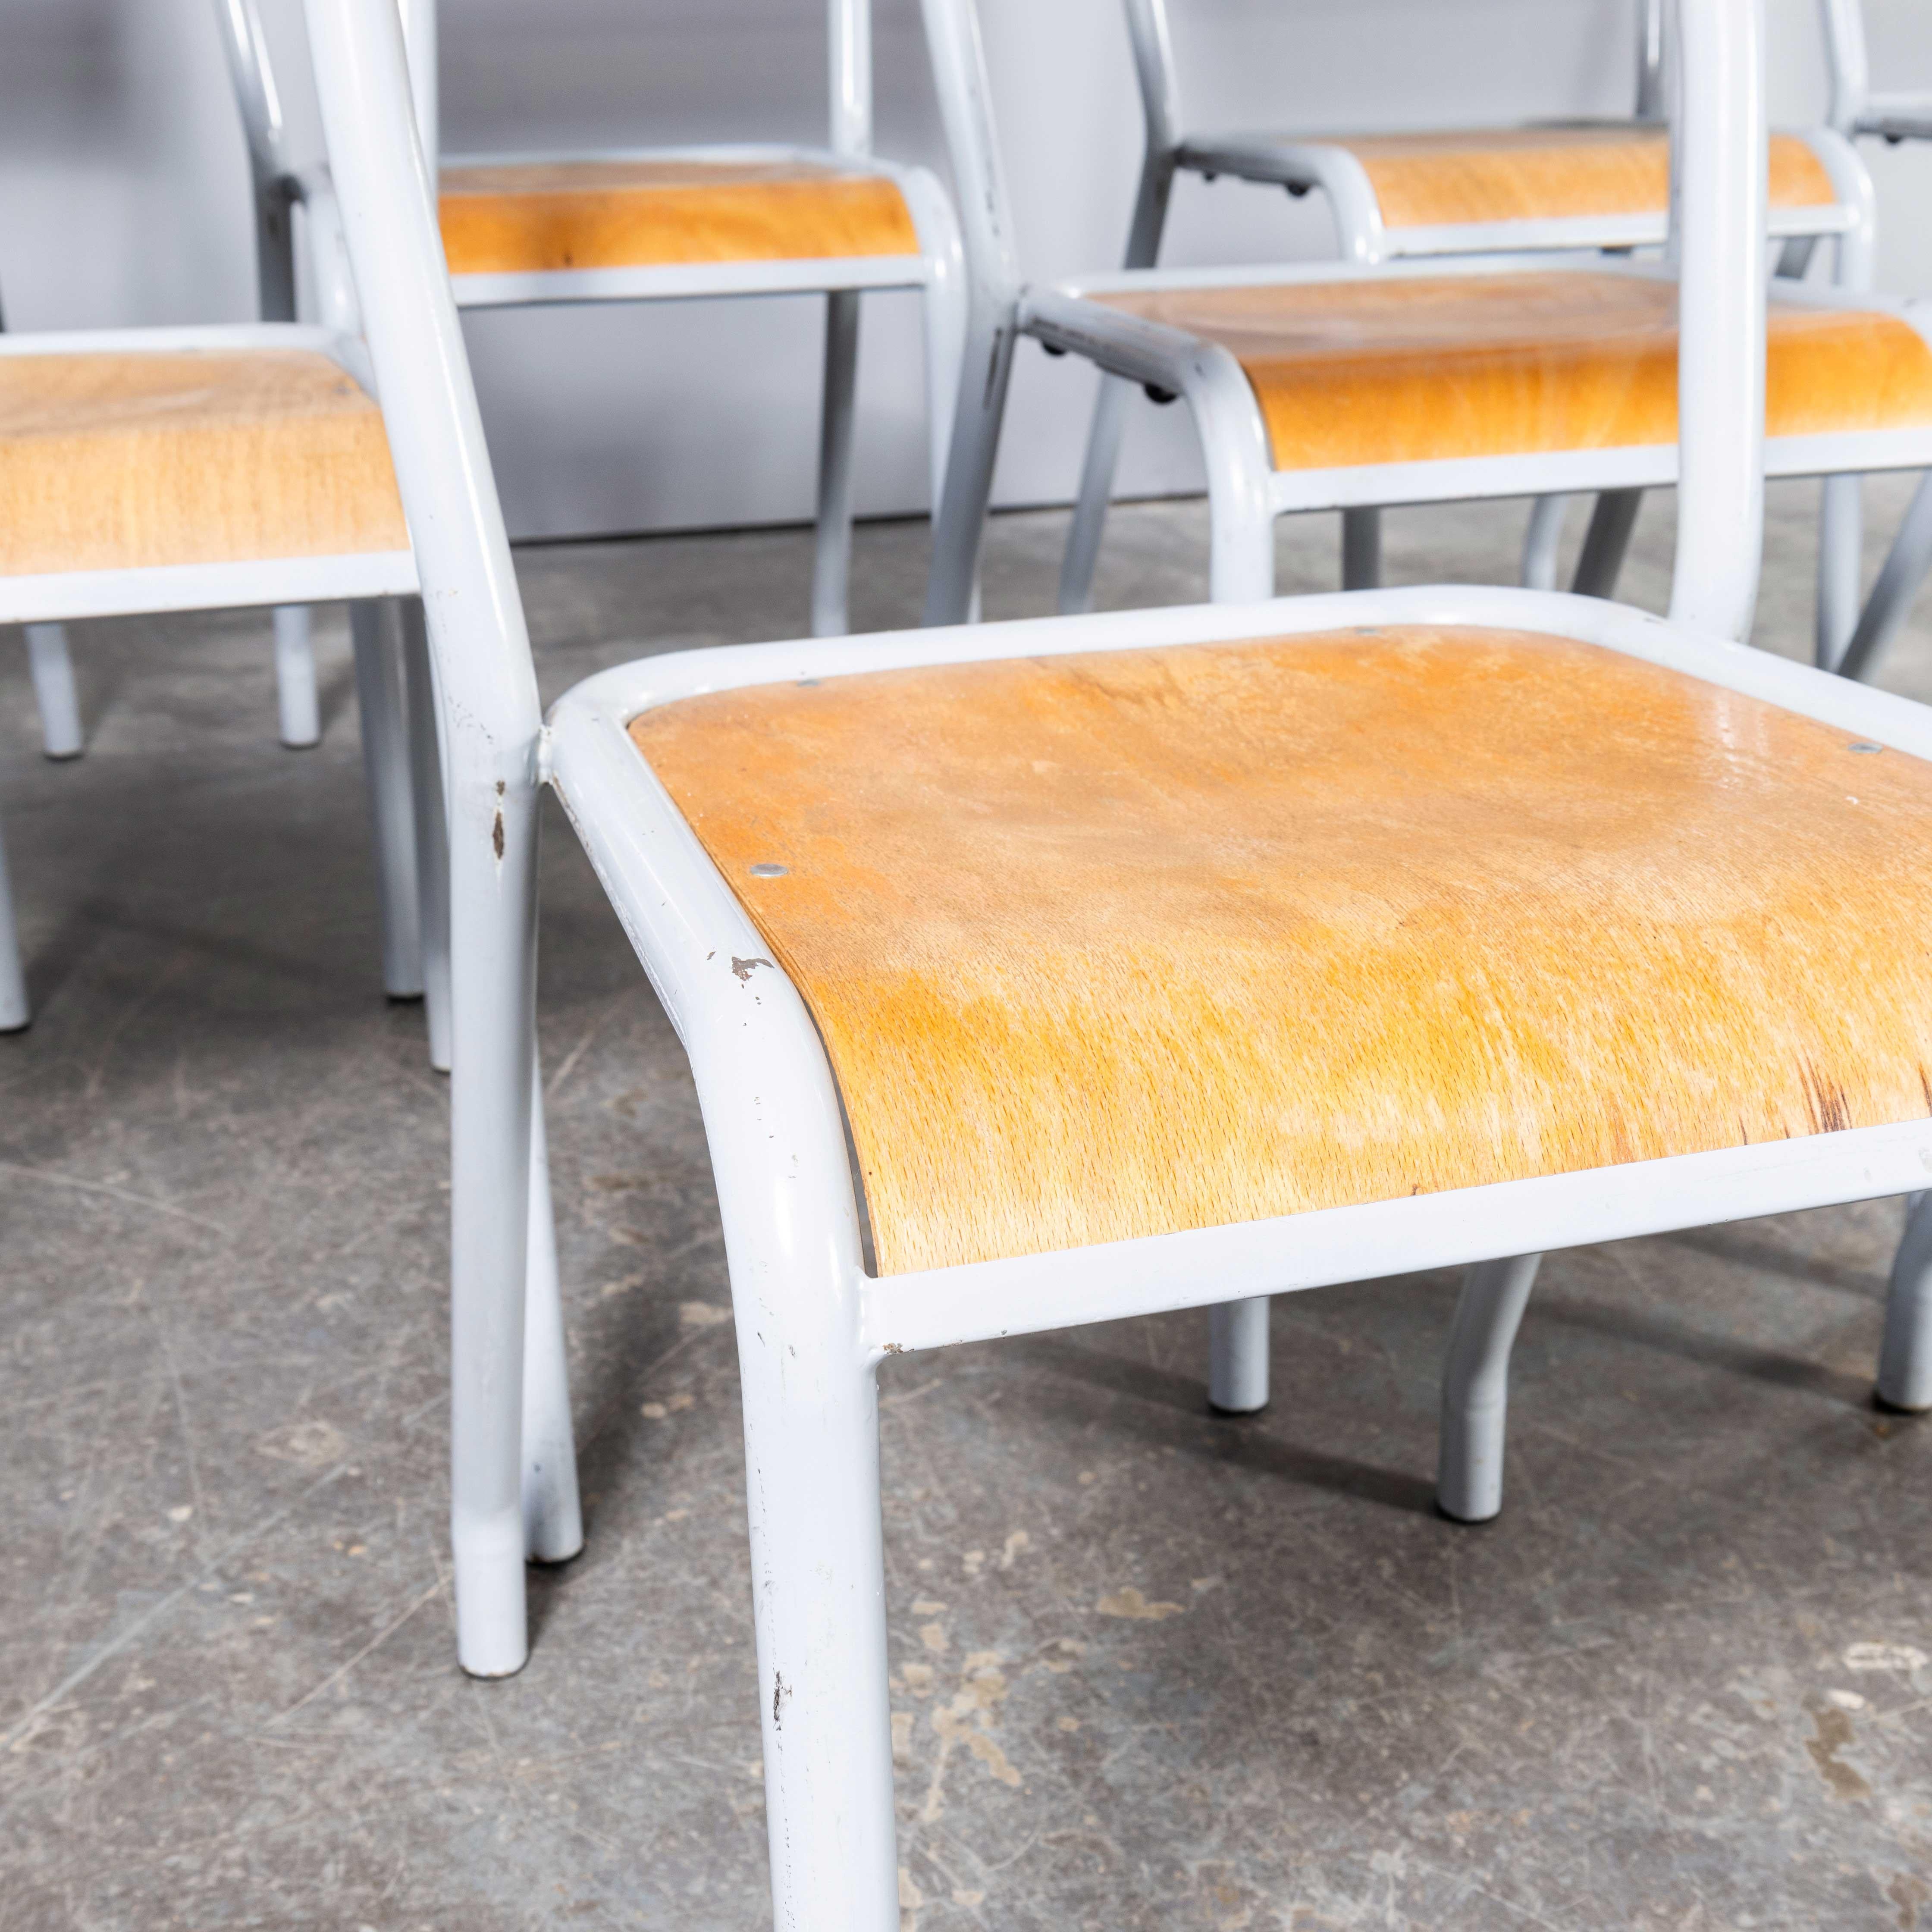 1950’s Original Lime White French Tolix Wood Seat Metal Bistro Dining Chair – Set Of Nine
1950’s Original Lime White French Tolix Wood Seat Metal Bistro Dining Chair – Set Of Nine. Tolix is one of our all time favourite companies. In 1907 Frenchman